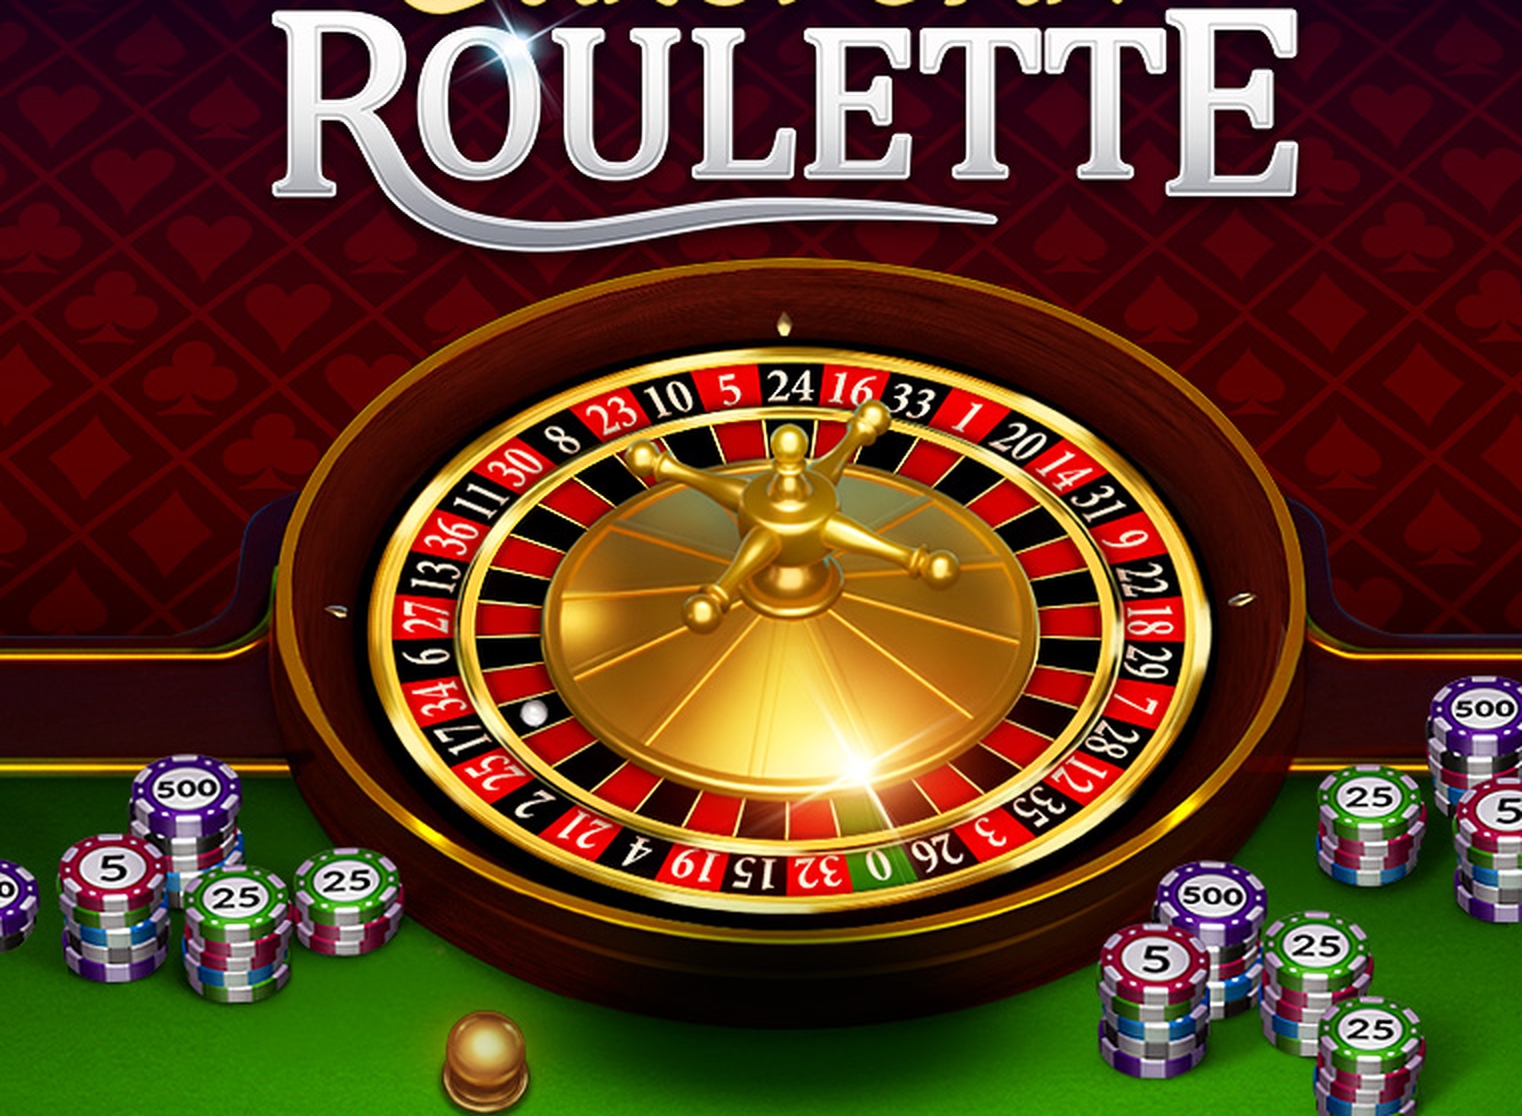 The American Roulette Pro Online Slot Demo Game by World Match